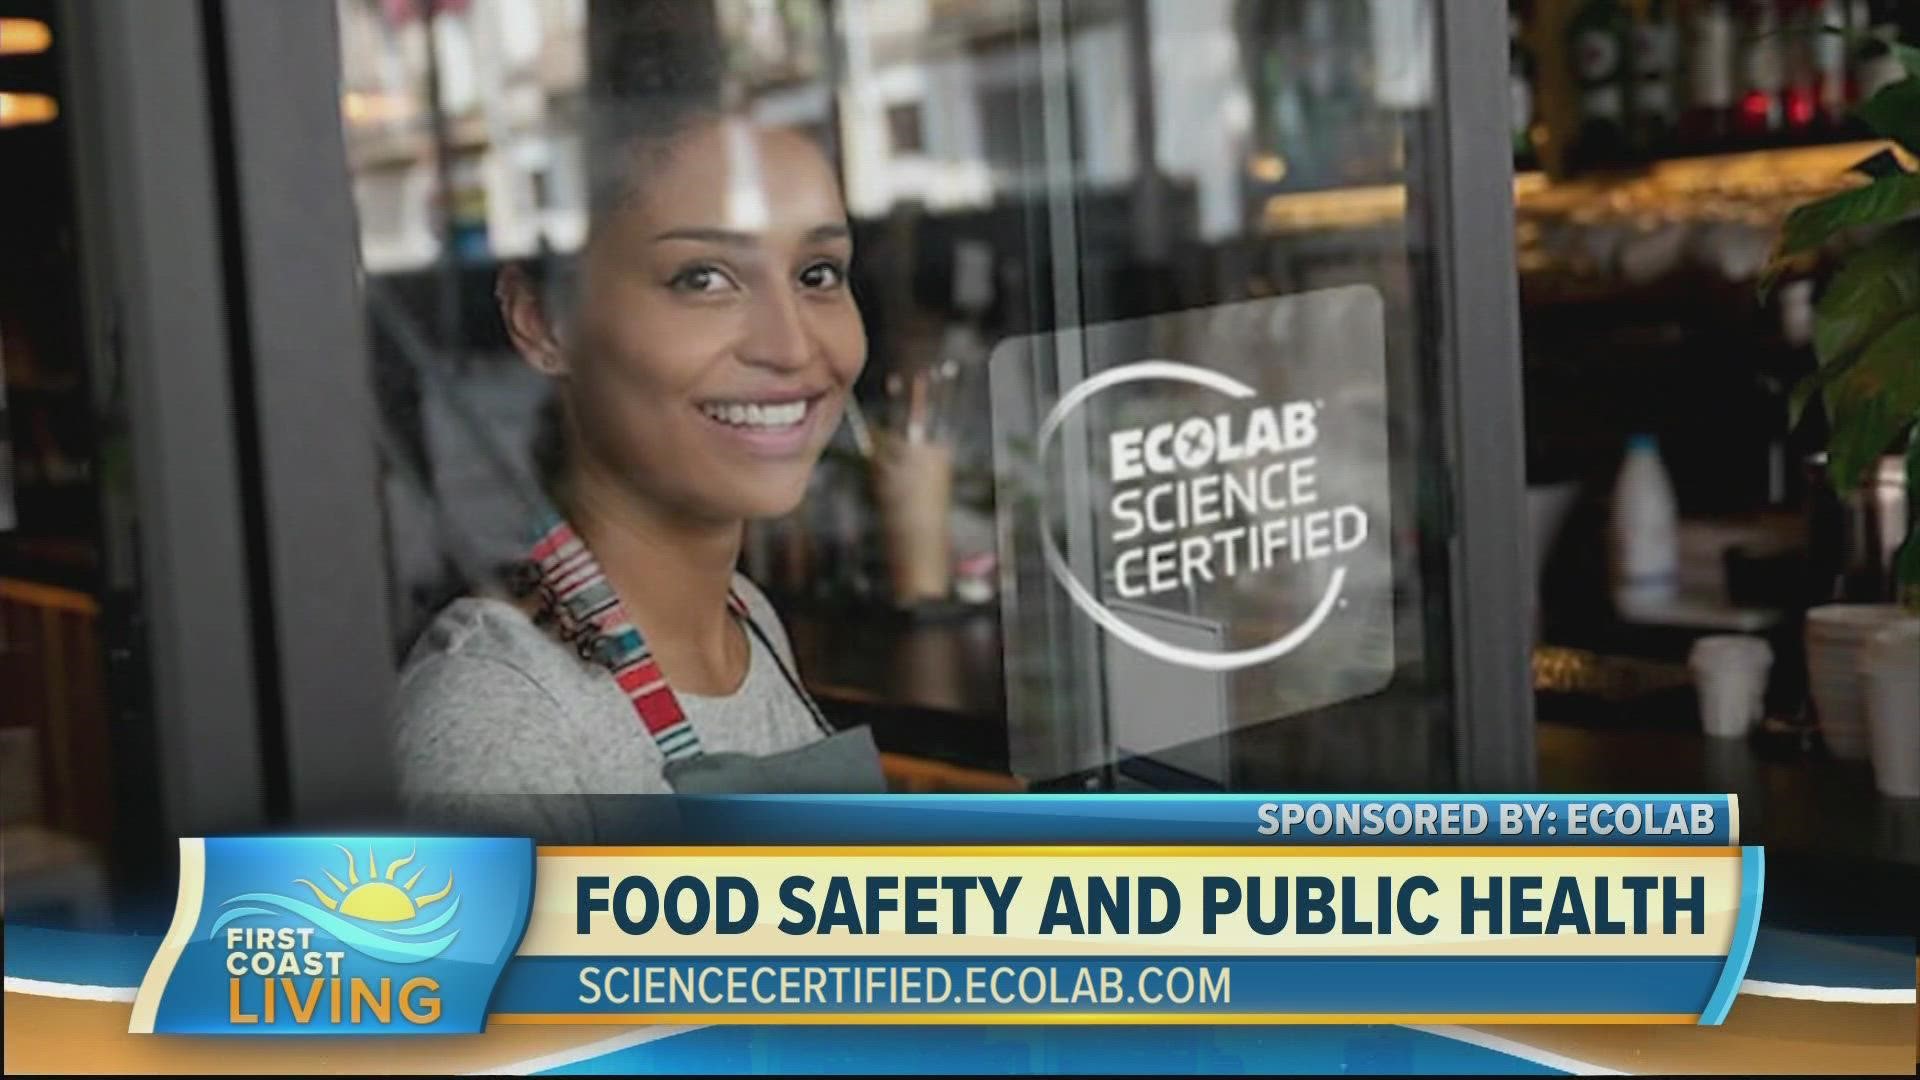 Bravo & truTV celebrity chef, Justin Sutherland teams with Ecolab Science Certified to showcase the importance of a cleanliness & food safety.